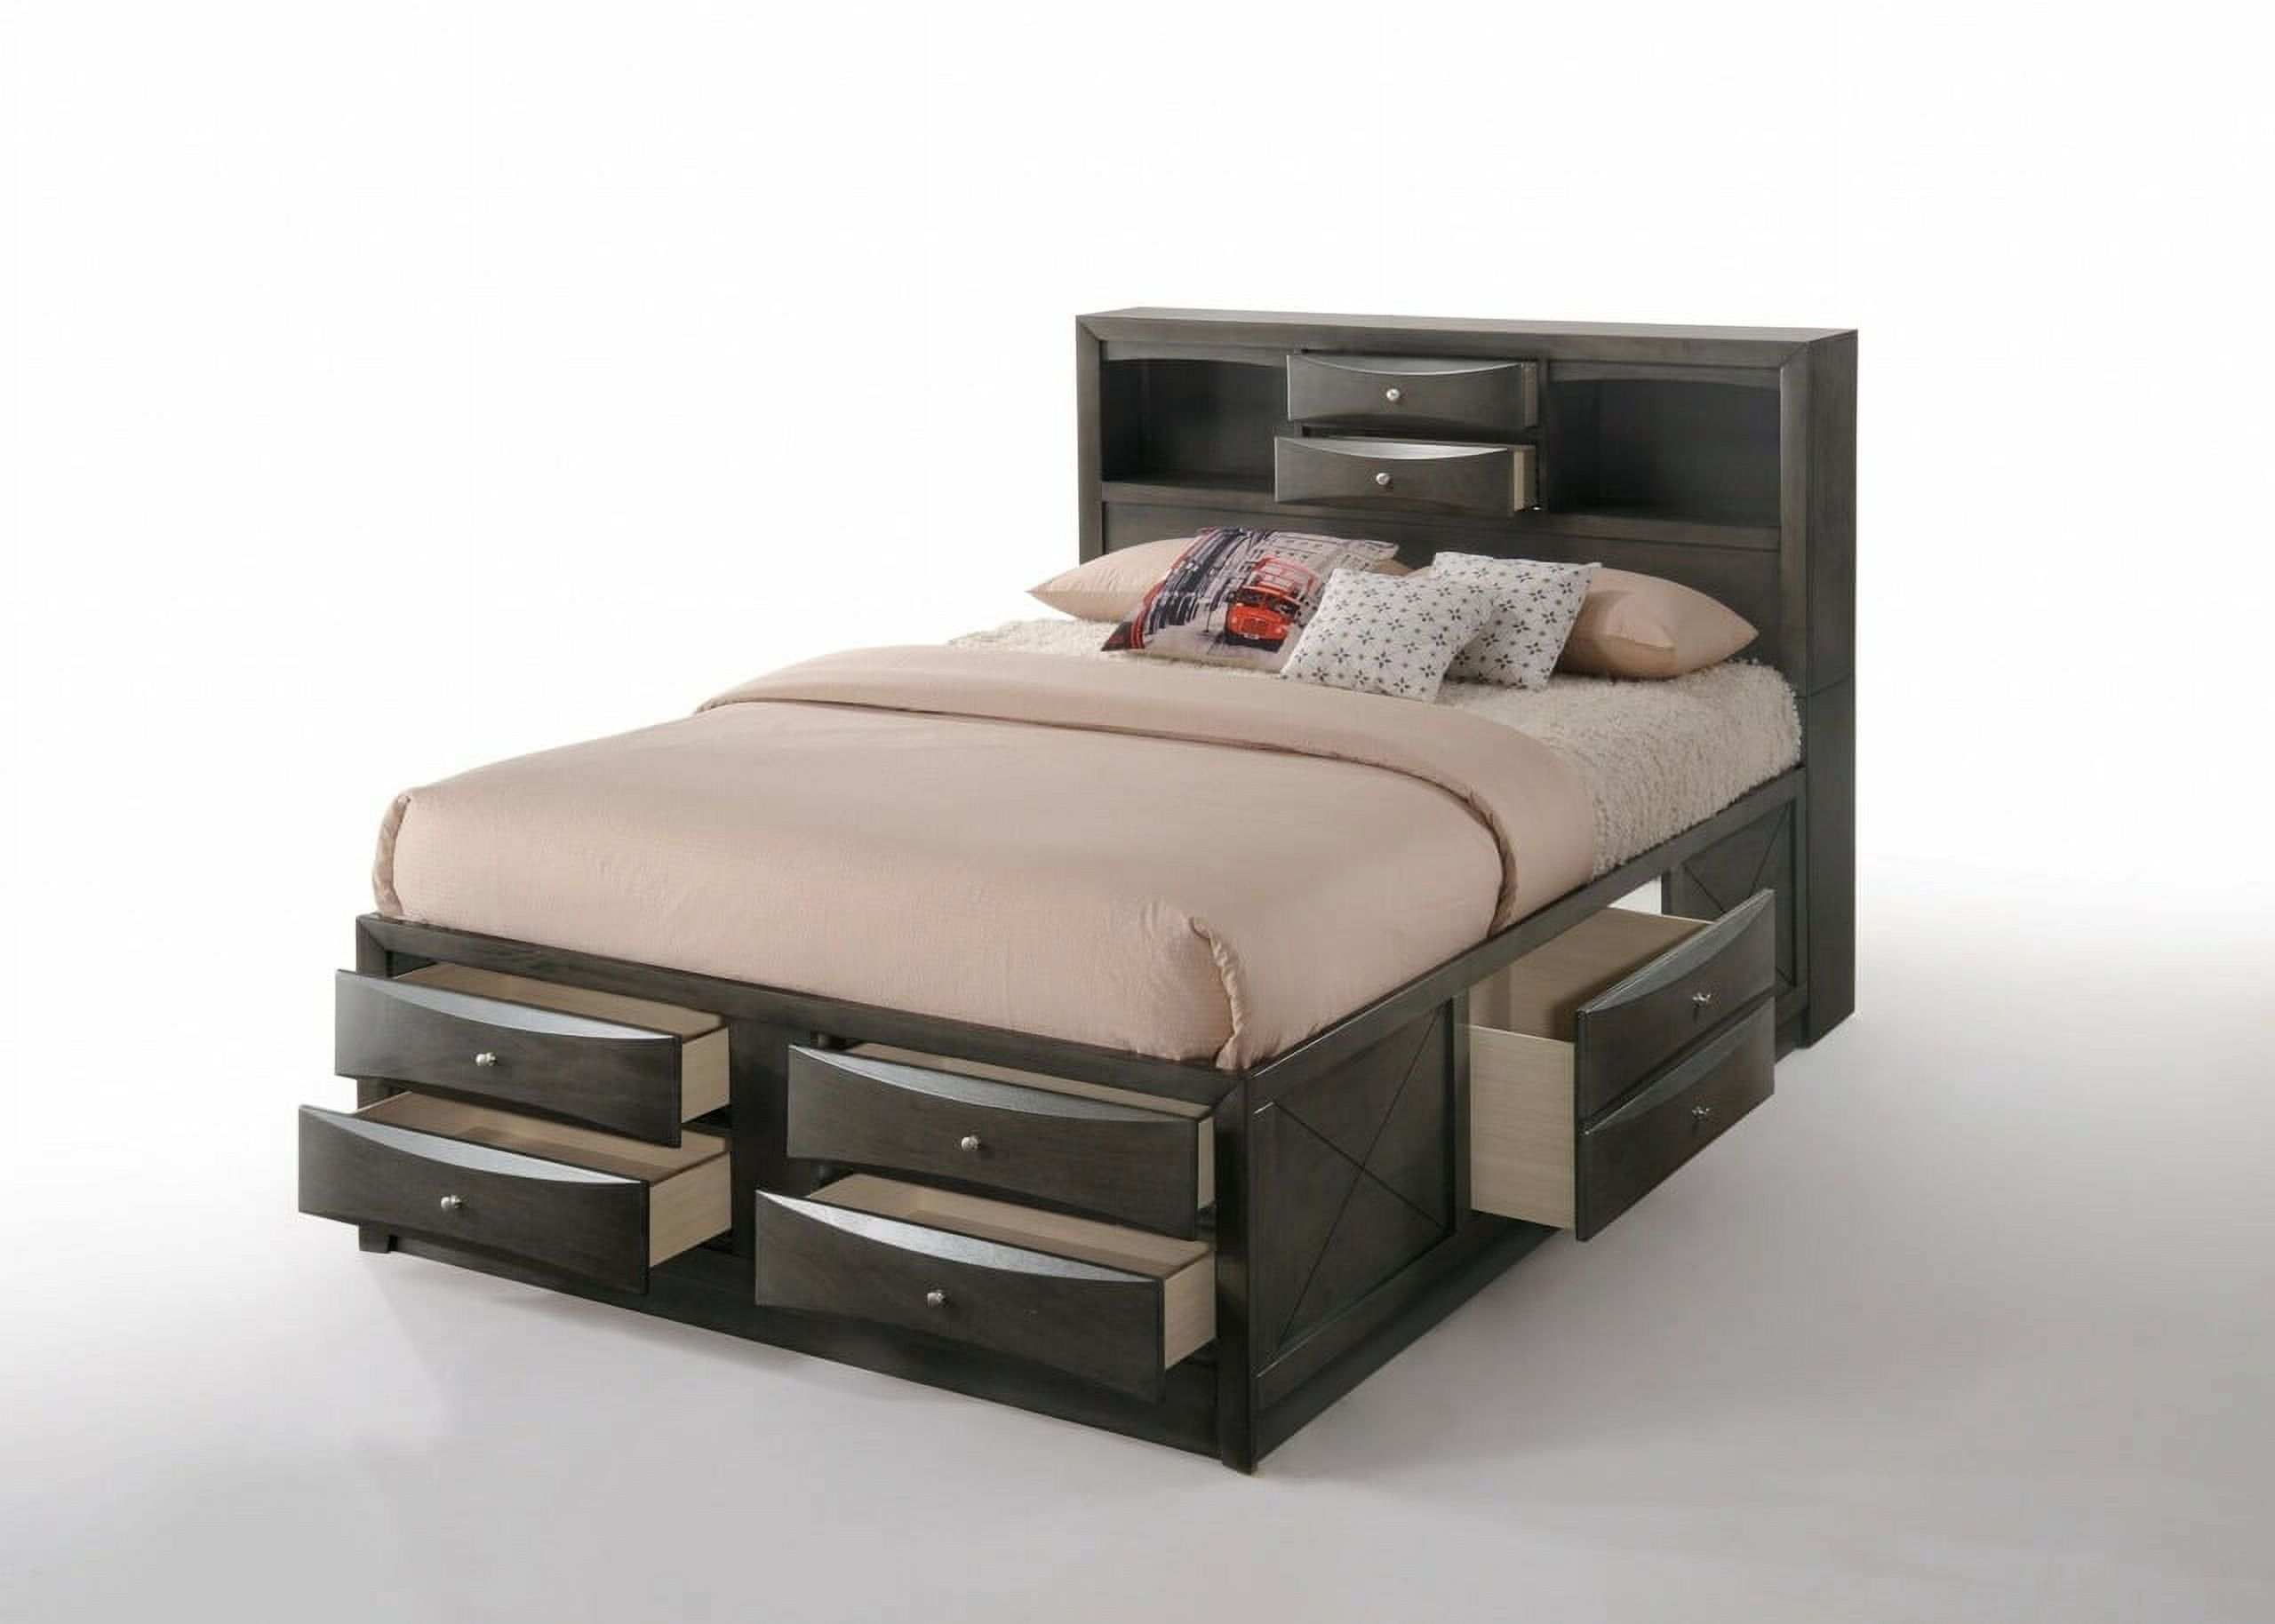 86" X 57" X 56" Gray Oak Rubber Wood Full Storage Bed - image 3 of 6